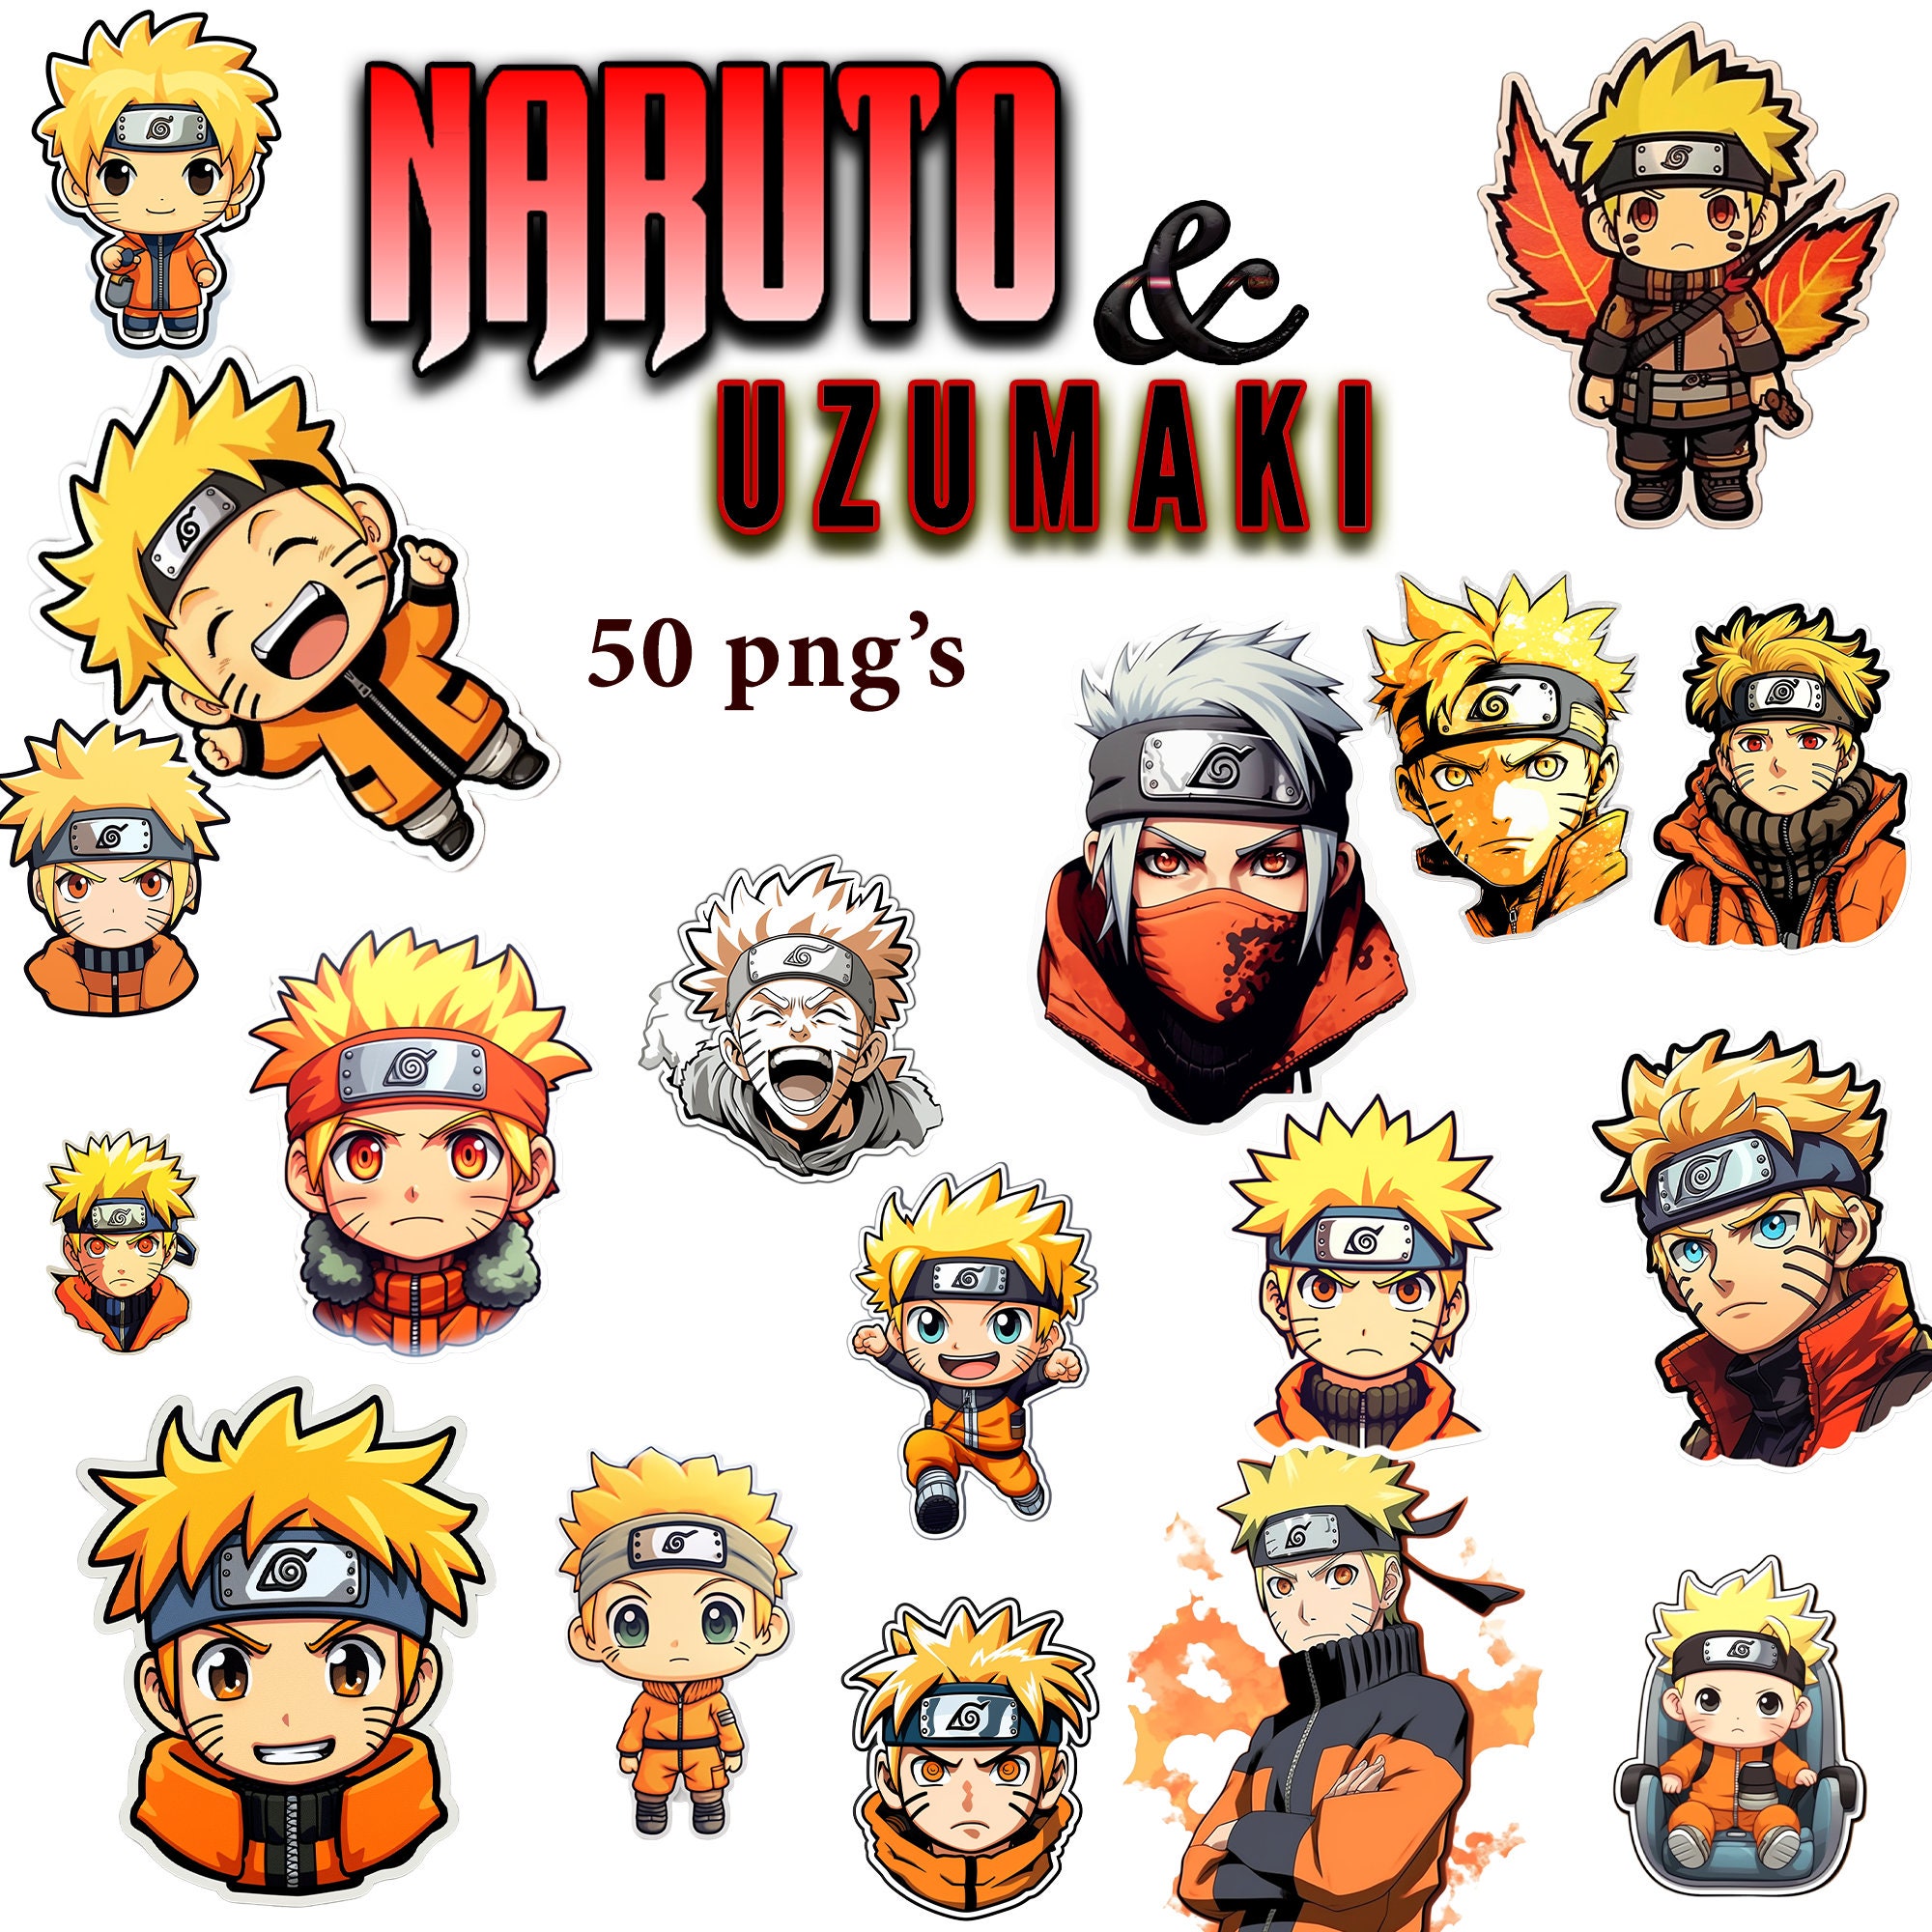 Uzumaki Naruto Anime 3D Motion Sticker Creative Car Sticker Decorative  Mirrors Notebook Luggage Wall Stickers For Kids Rooms